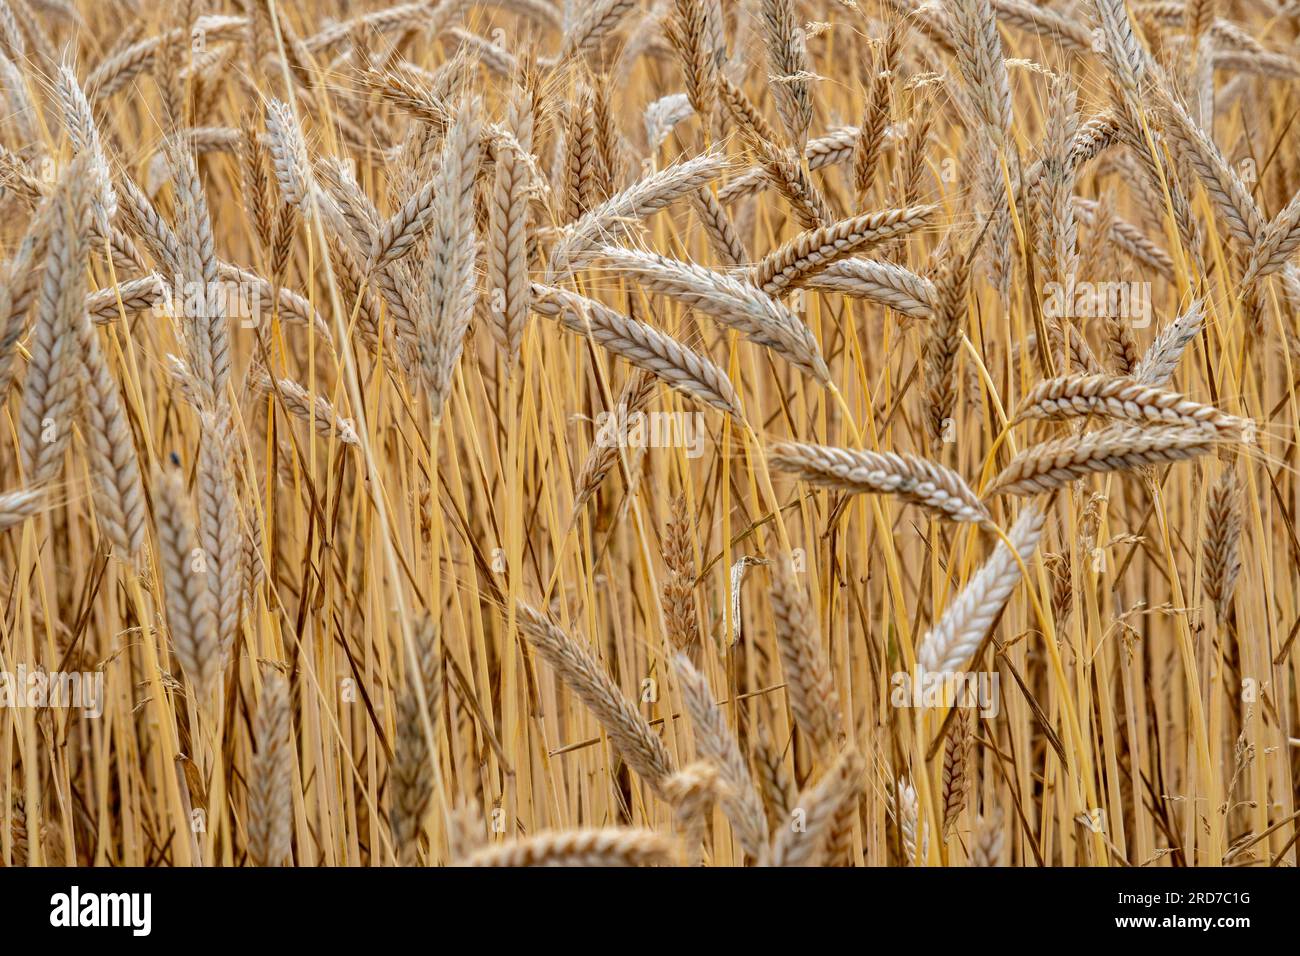 Wheat field with golden ears Stock Photo